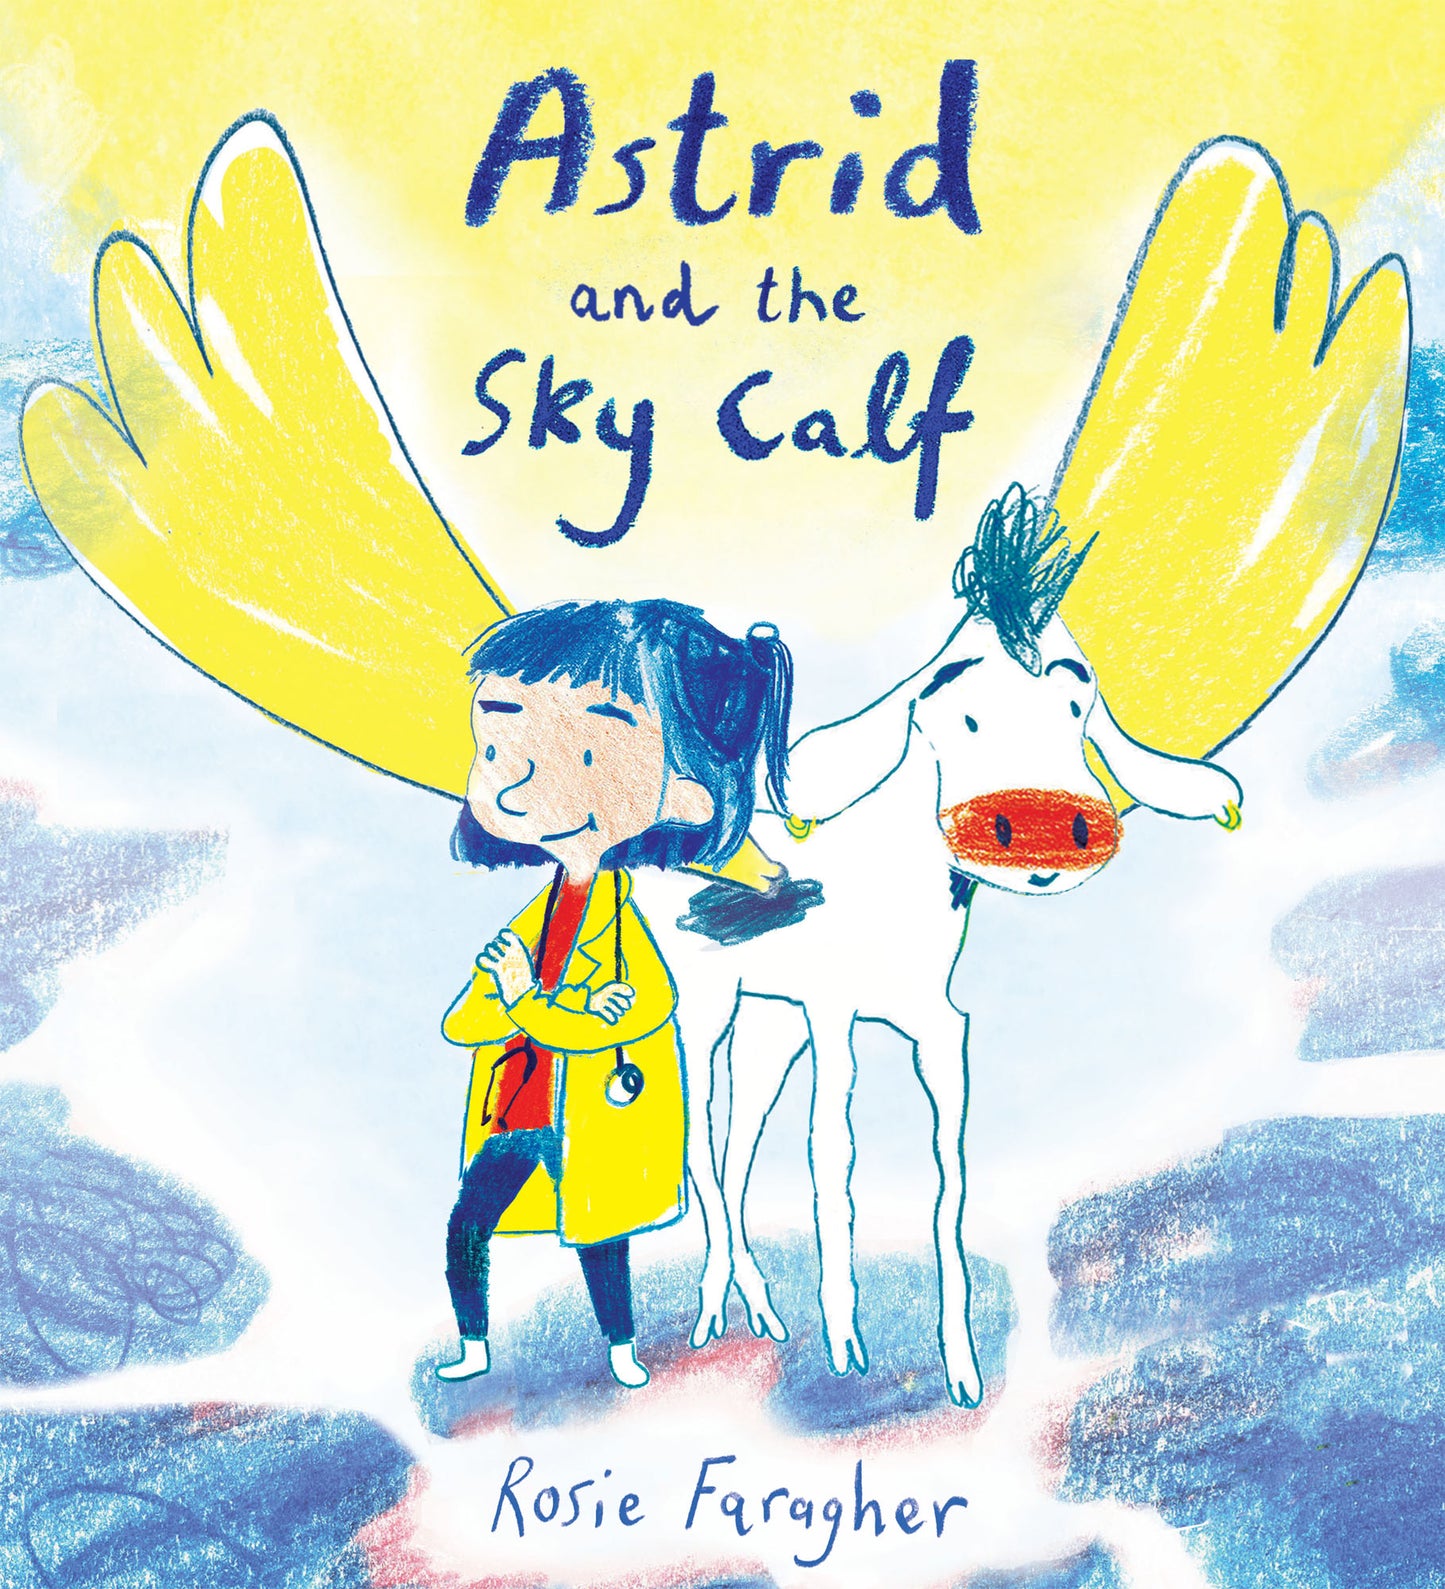 Astrid and the Sky Calf (Hardcover Edition)